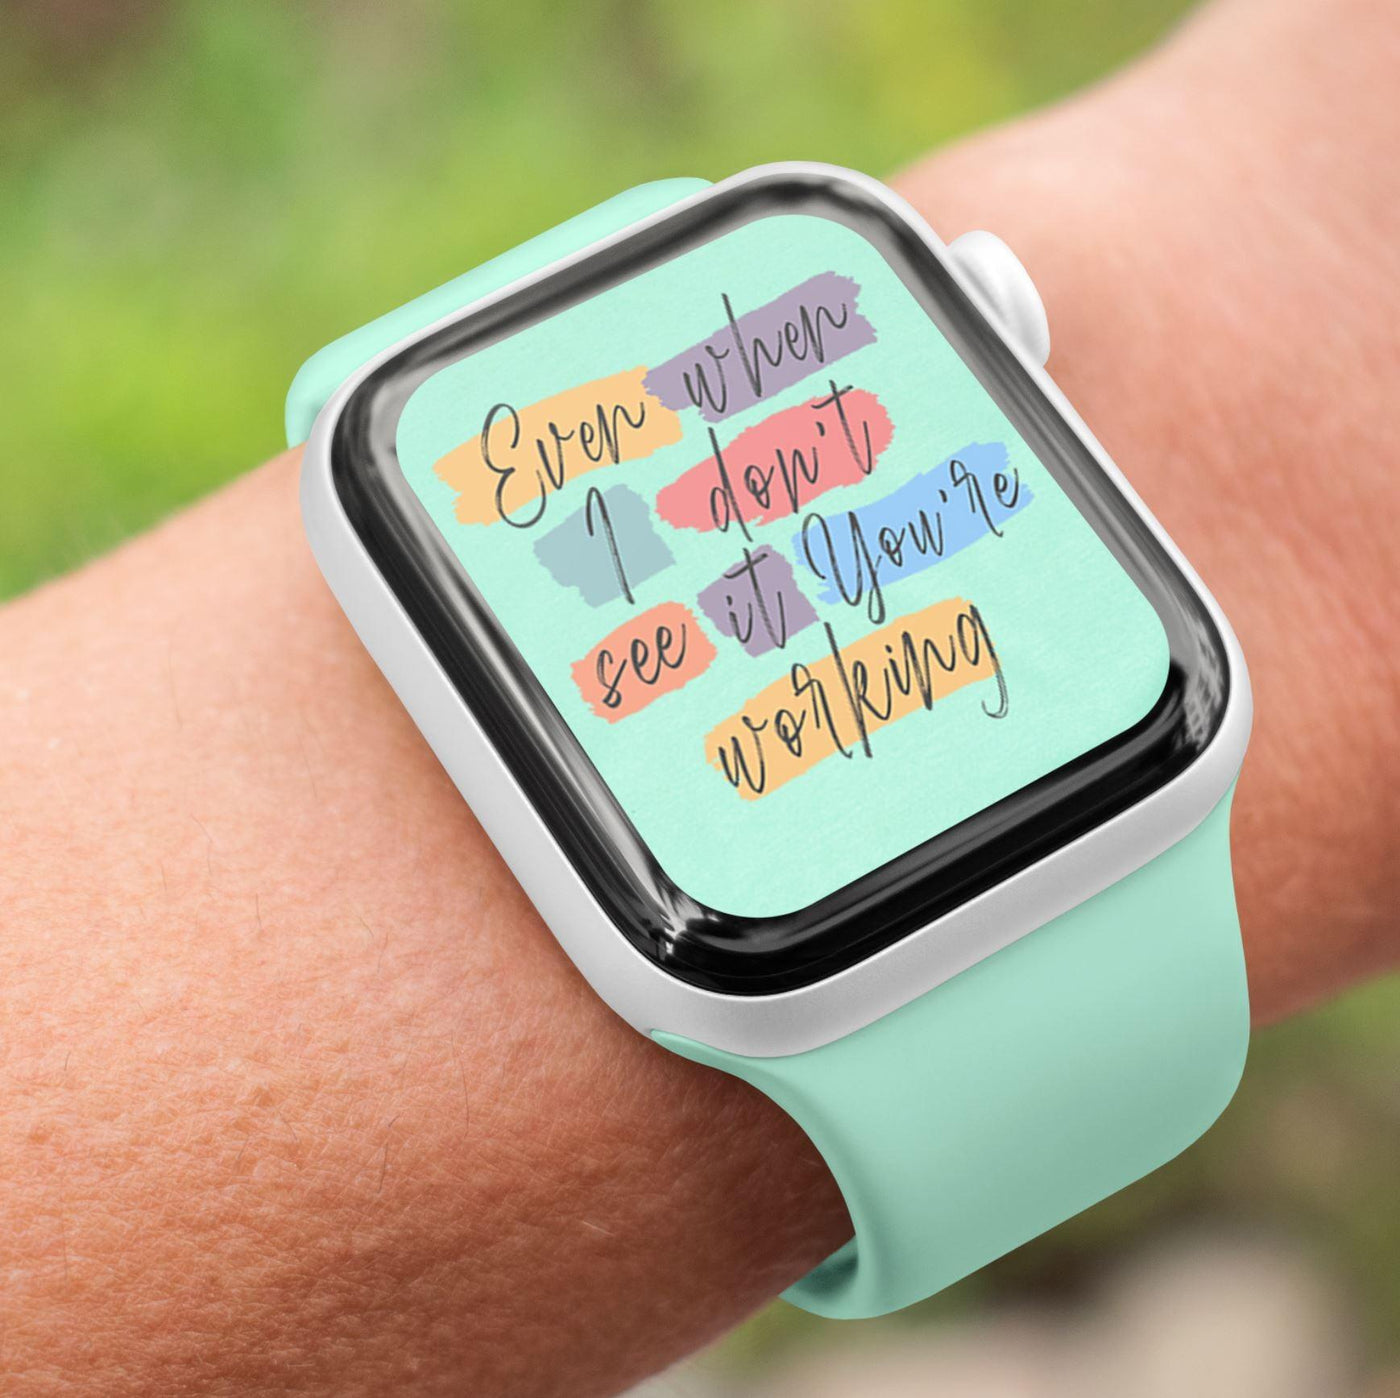 Even when I don't see it your working - Watch Wallpaper - Grace & Co. Designs 